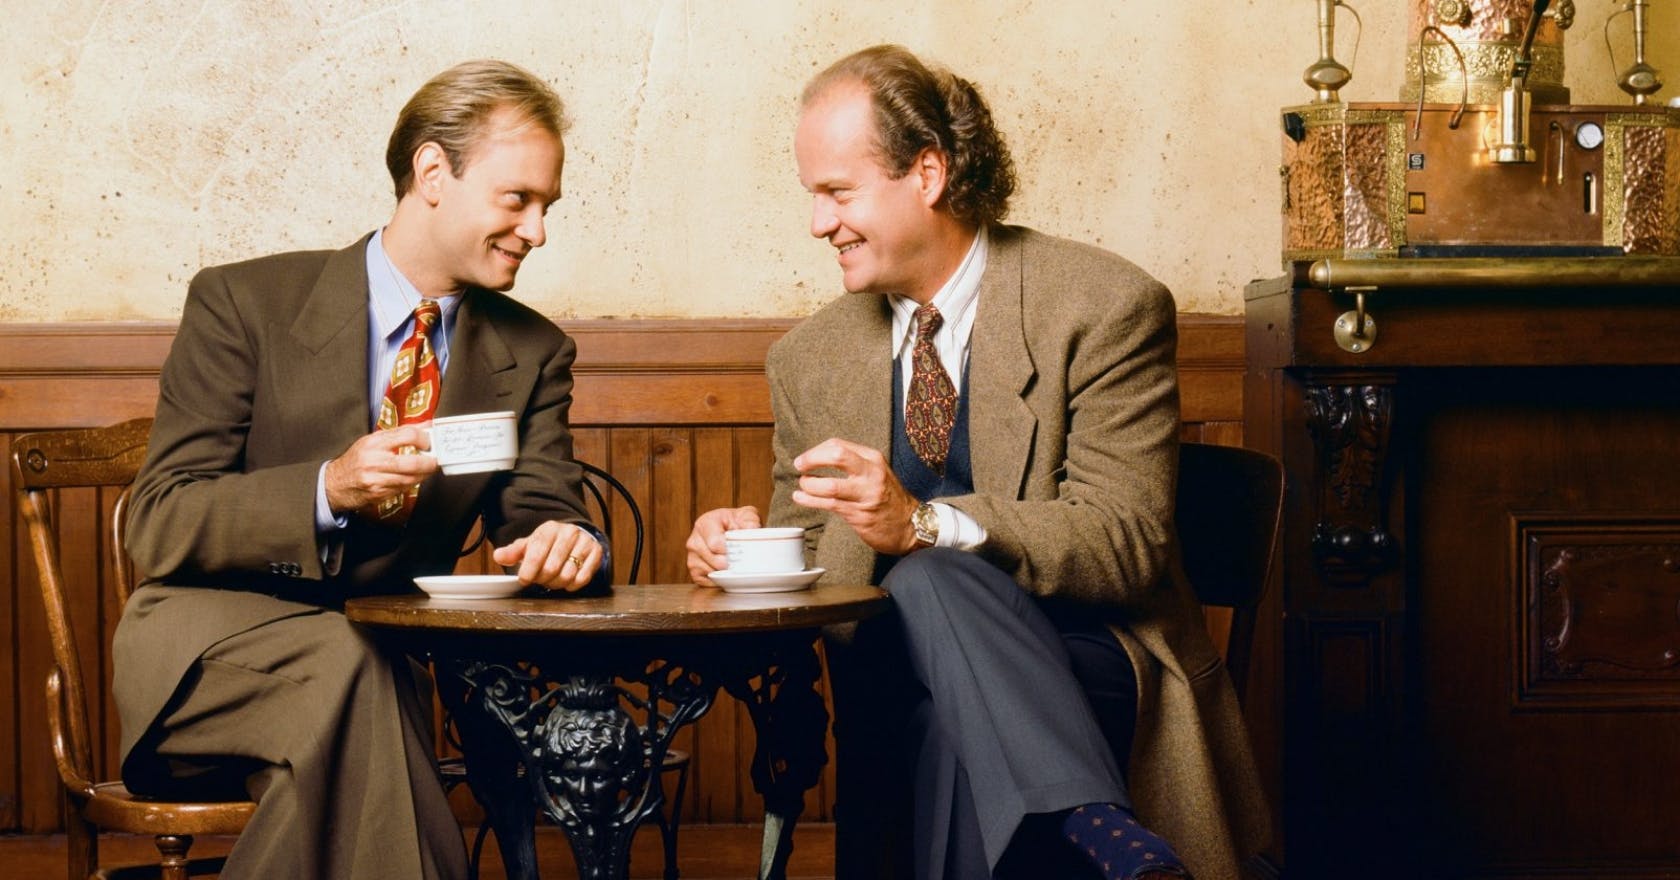 Frasier reboot: the real reason millennials still relate to the show in 2021